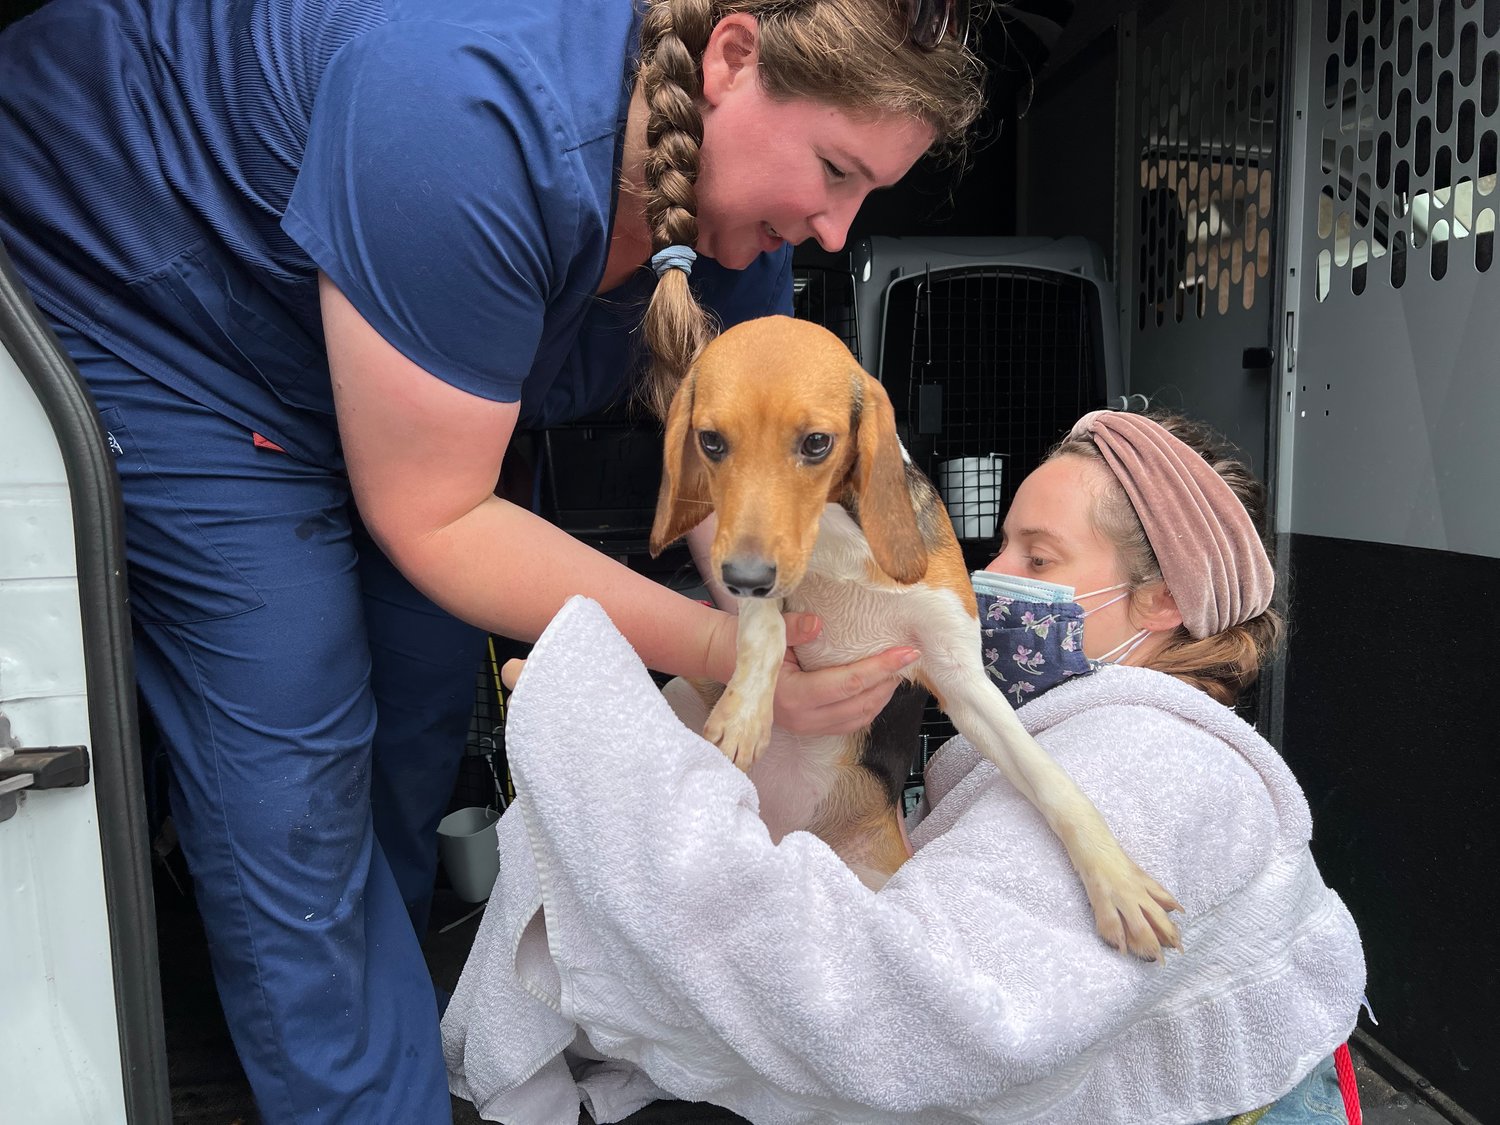 Humane Society for Southwest Washington Director of Animal Care and Population Liz Everling, left, and animal care technician Kristi Rivers handle one of 15 beagles as they arrive at the shelter on Aug. 20.